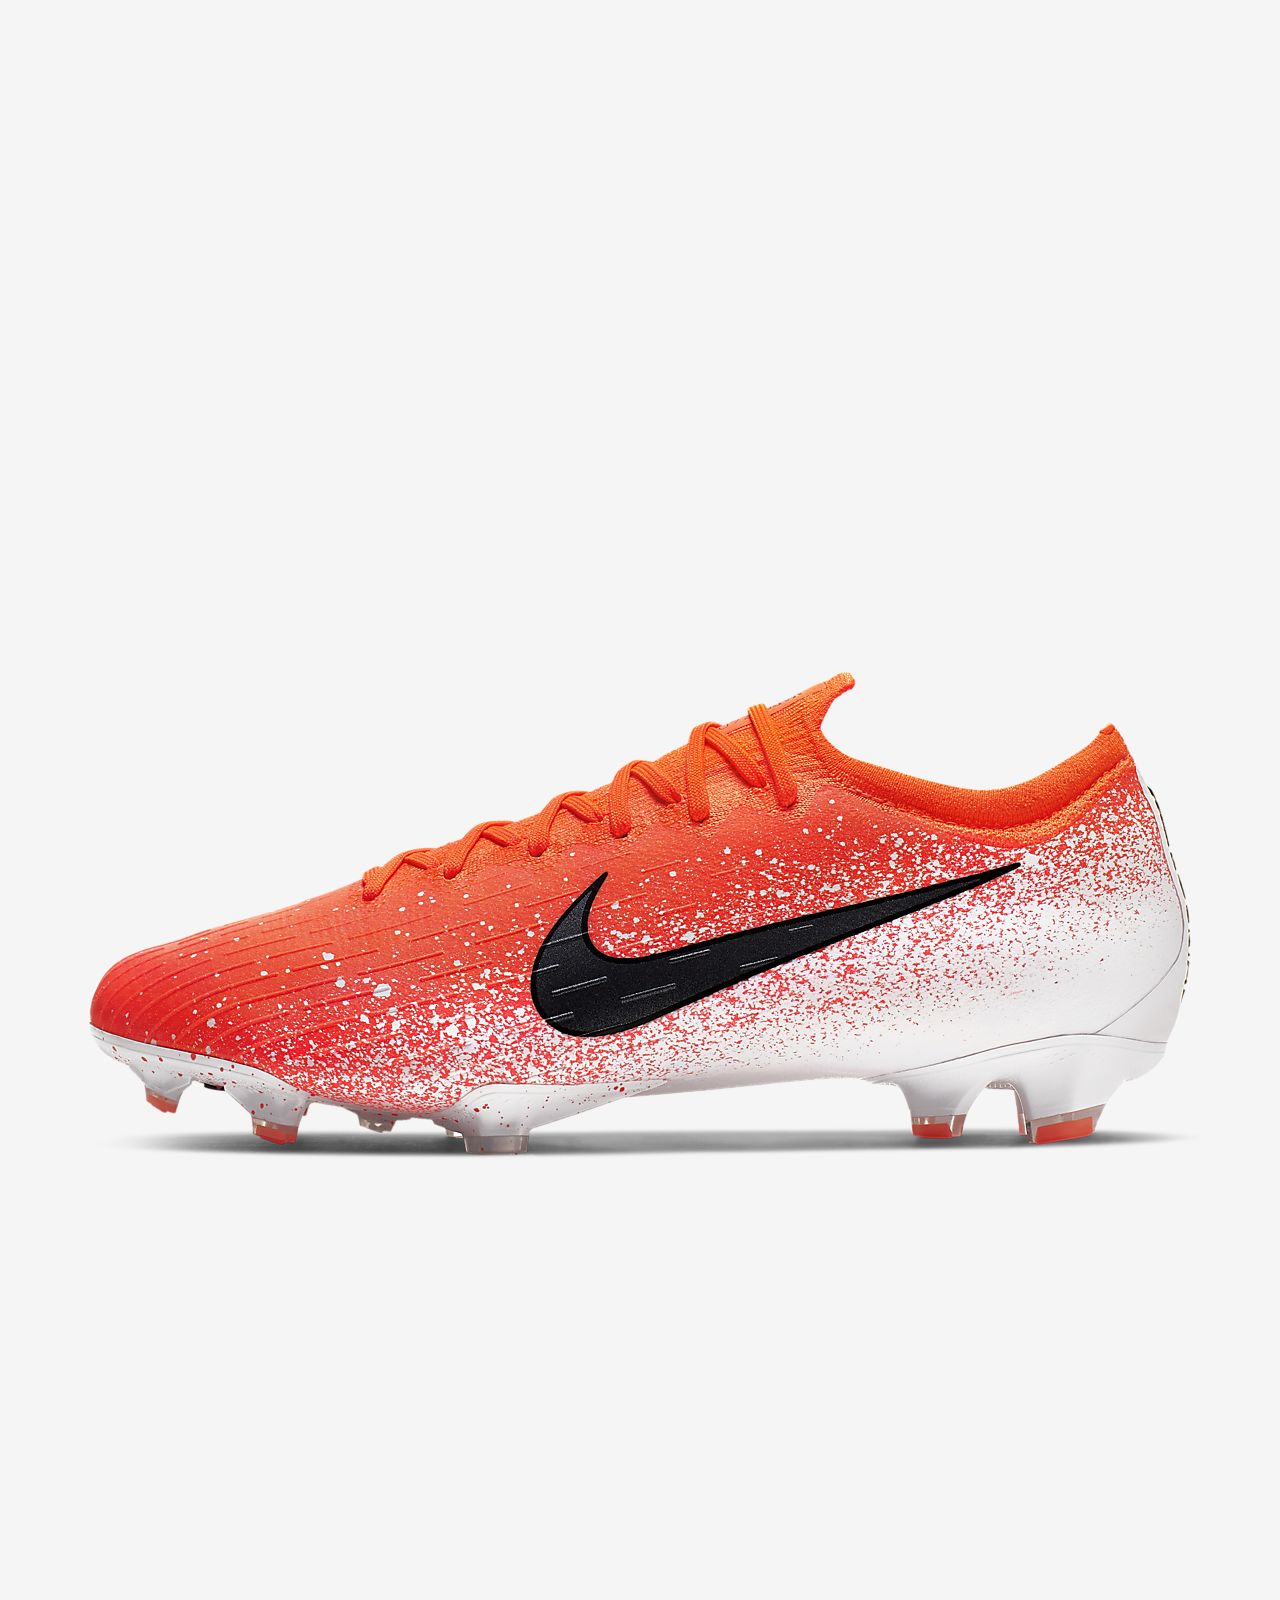 Free Delivery Kids Nike Mercurial Vapor XII PRO TF Football